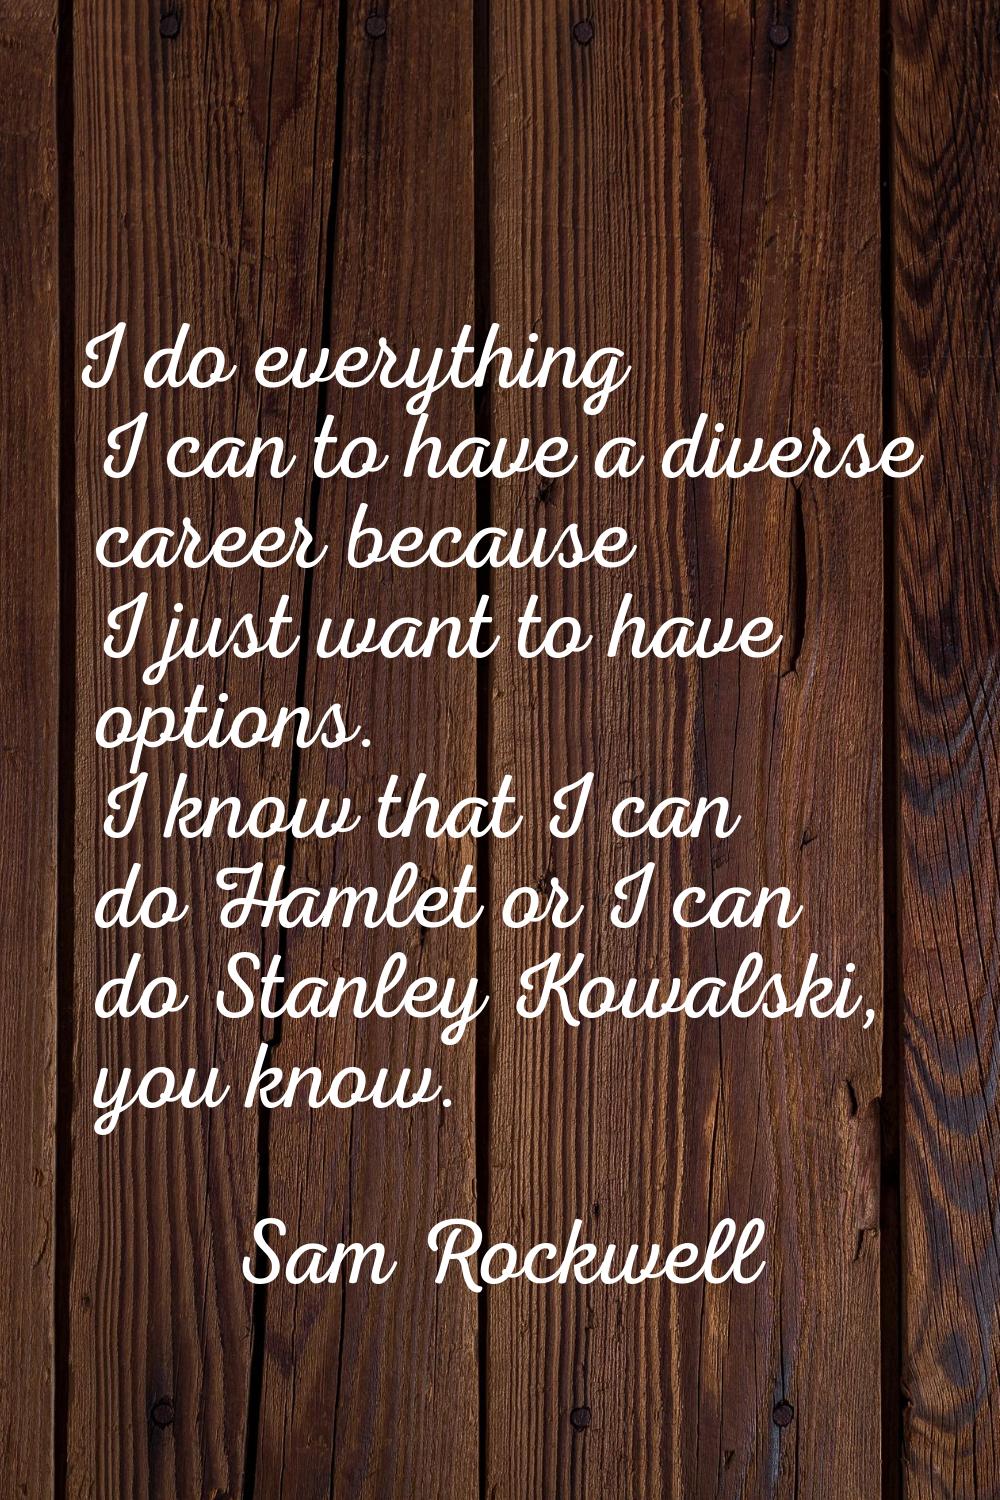 I do everything I can to have a diverse career because I just want to have options. I know that I c